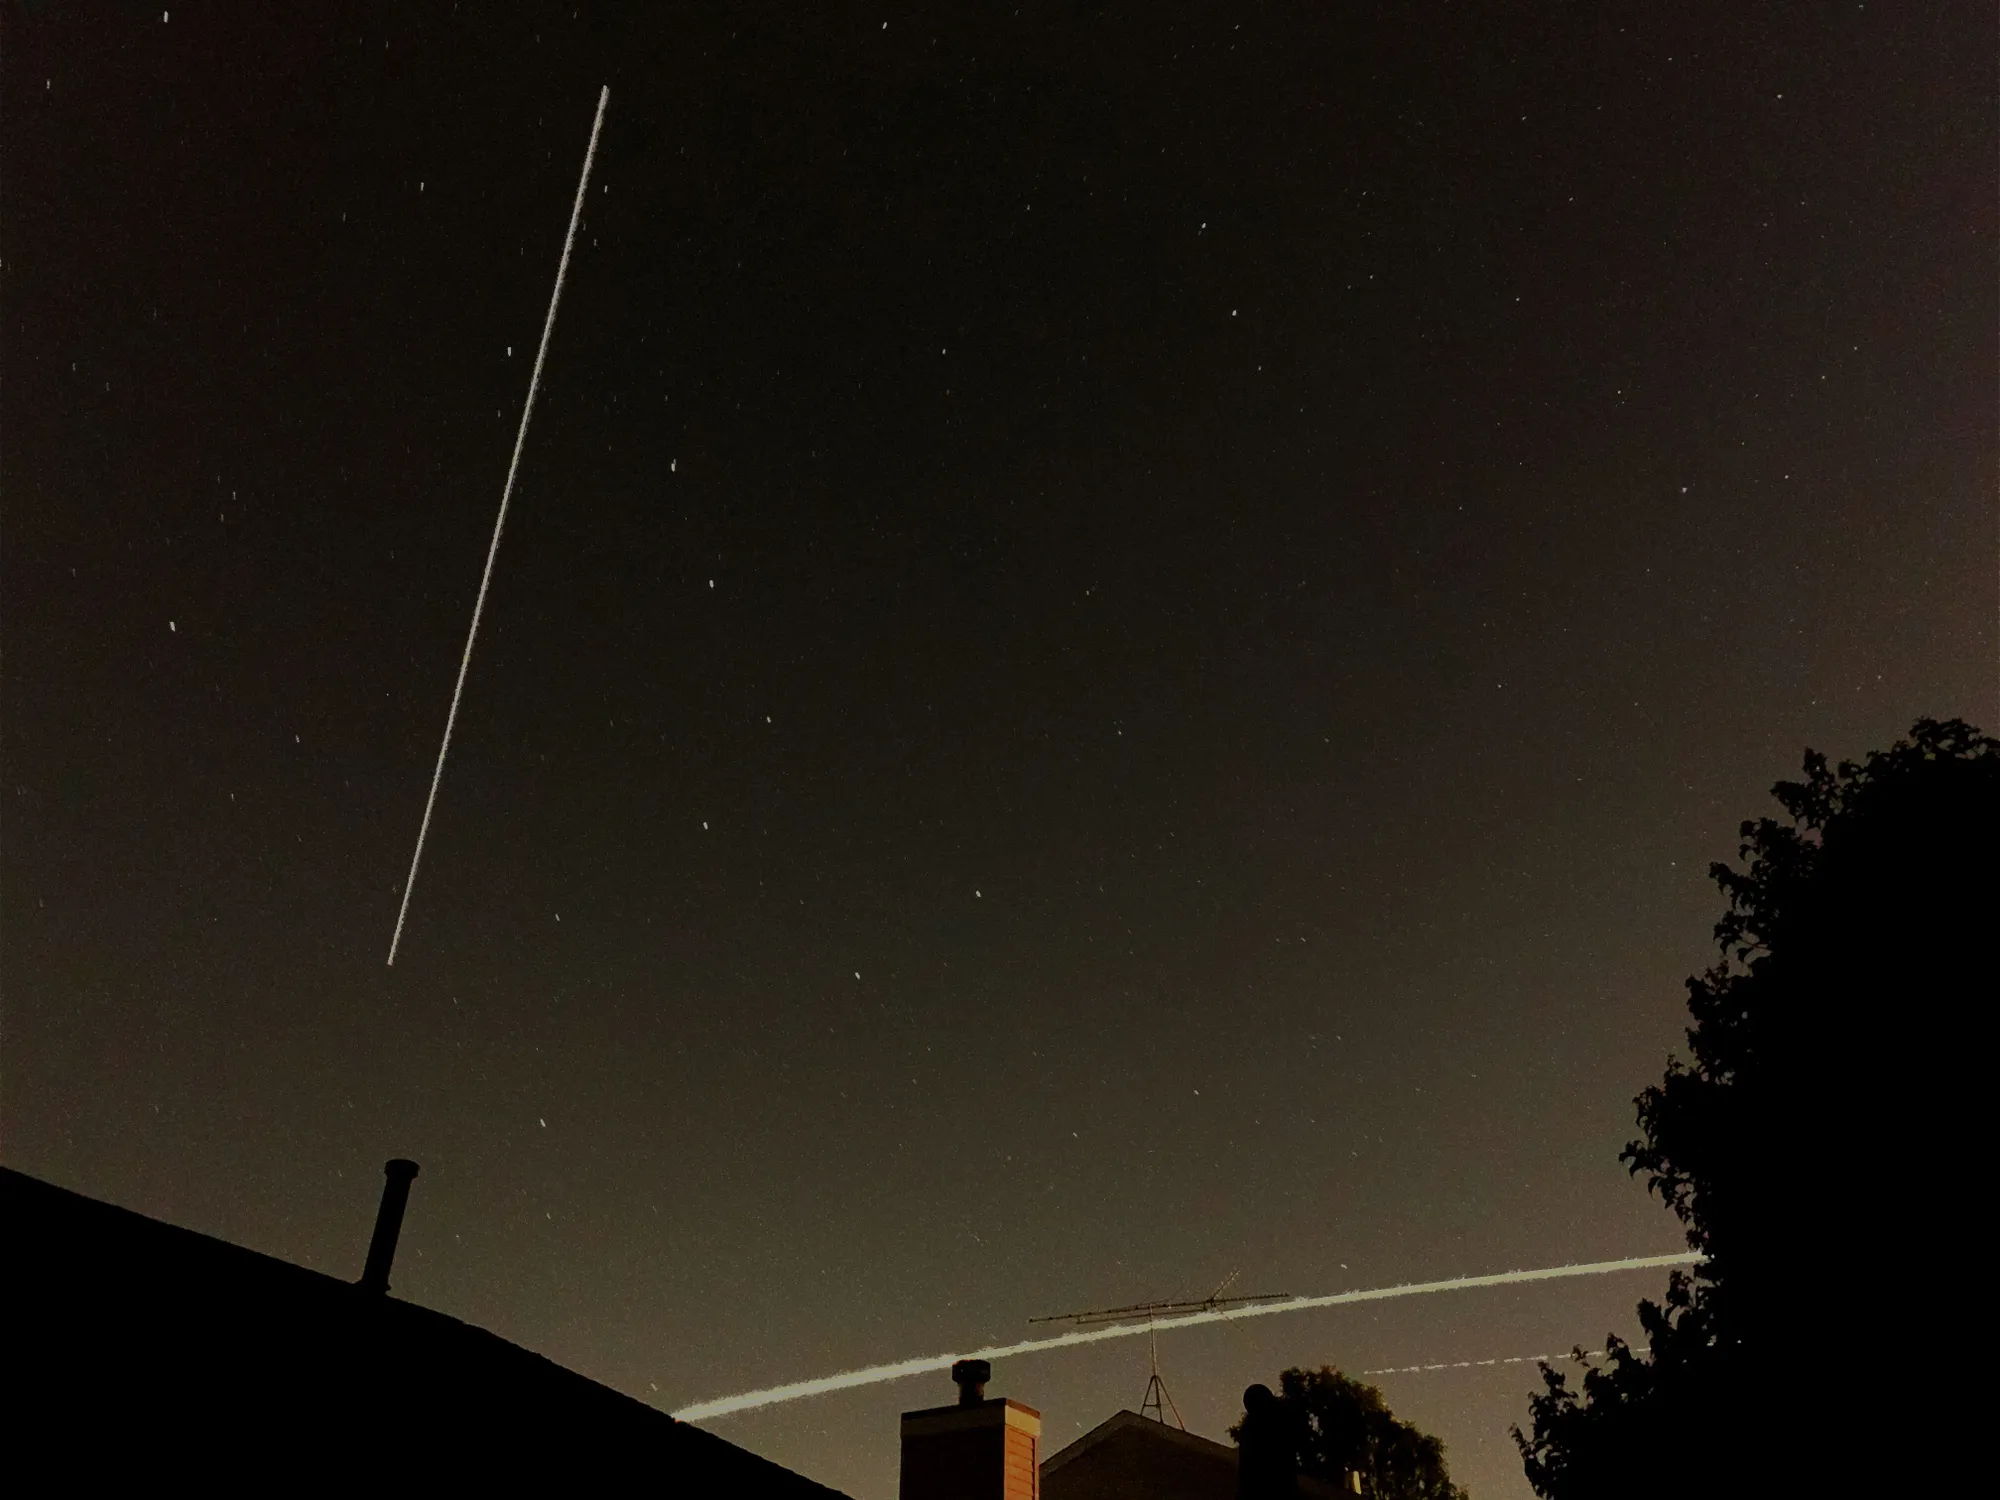 Tracking the International Space Station, August 2019